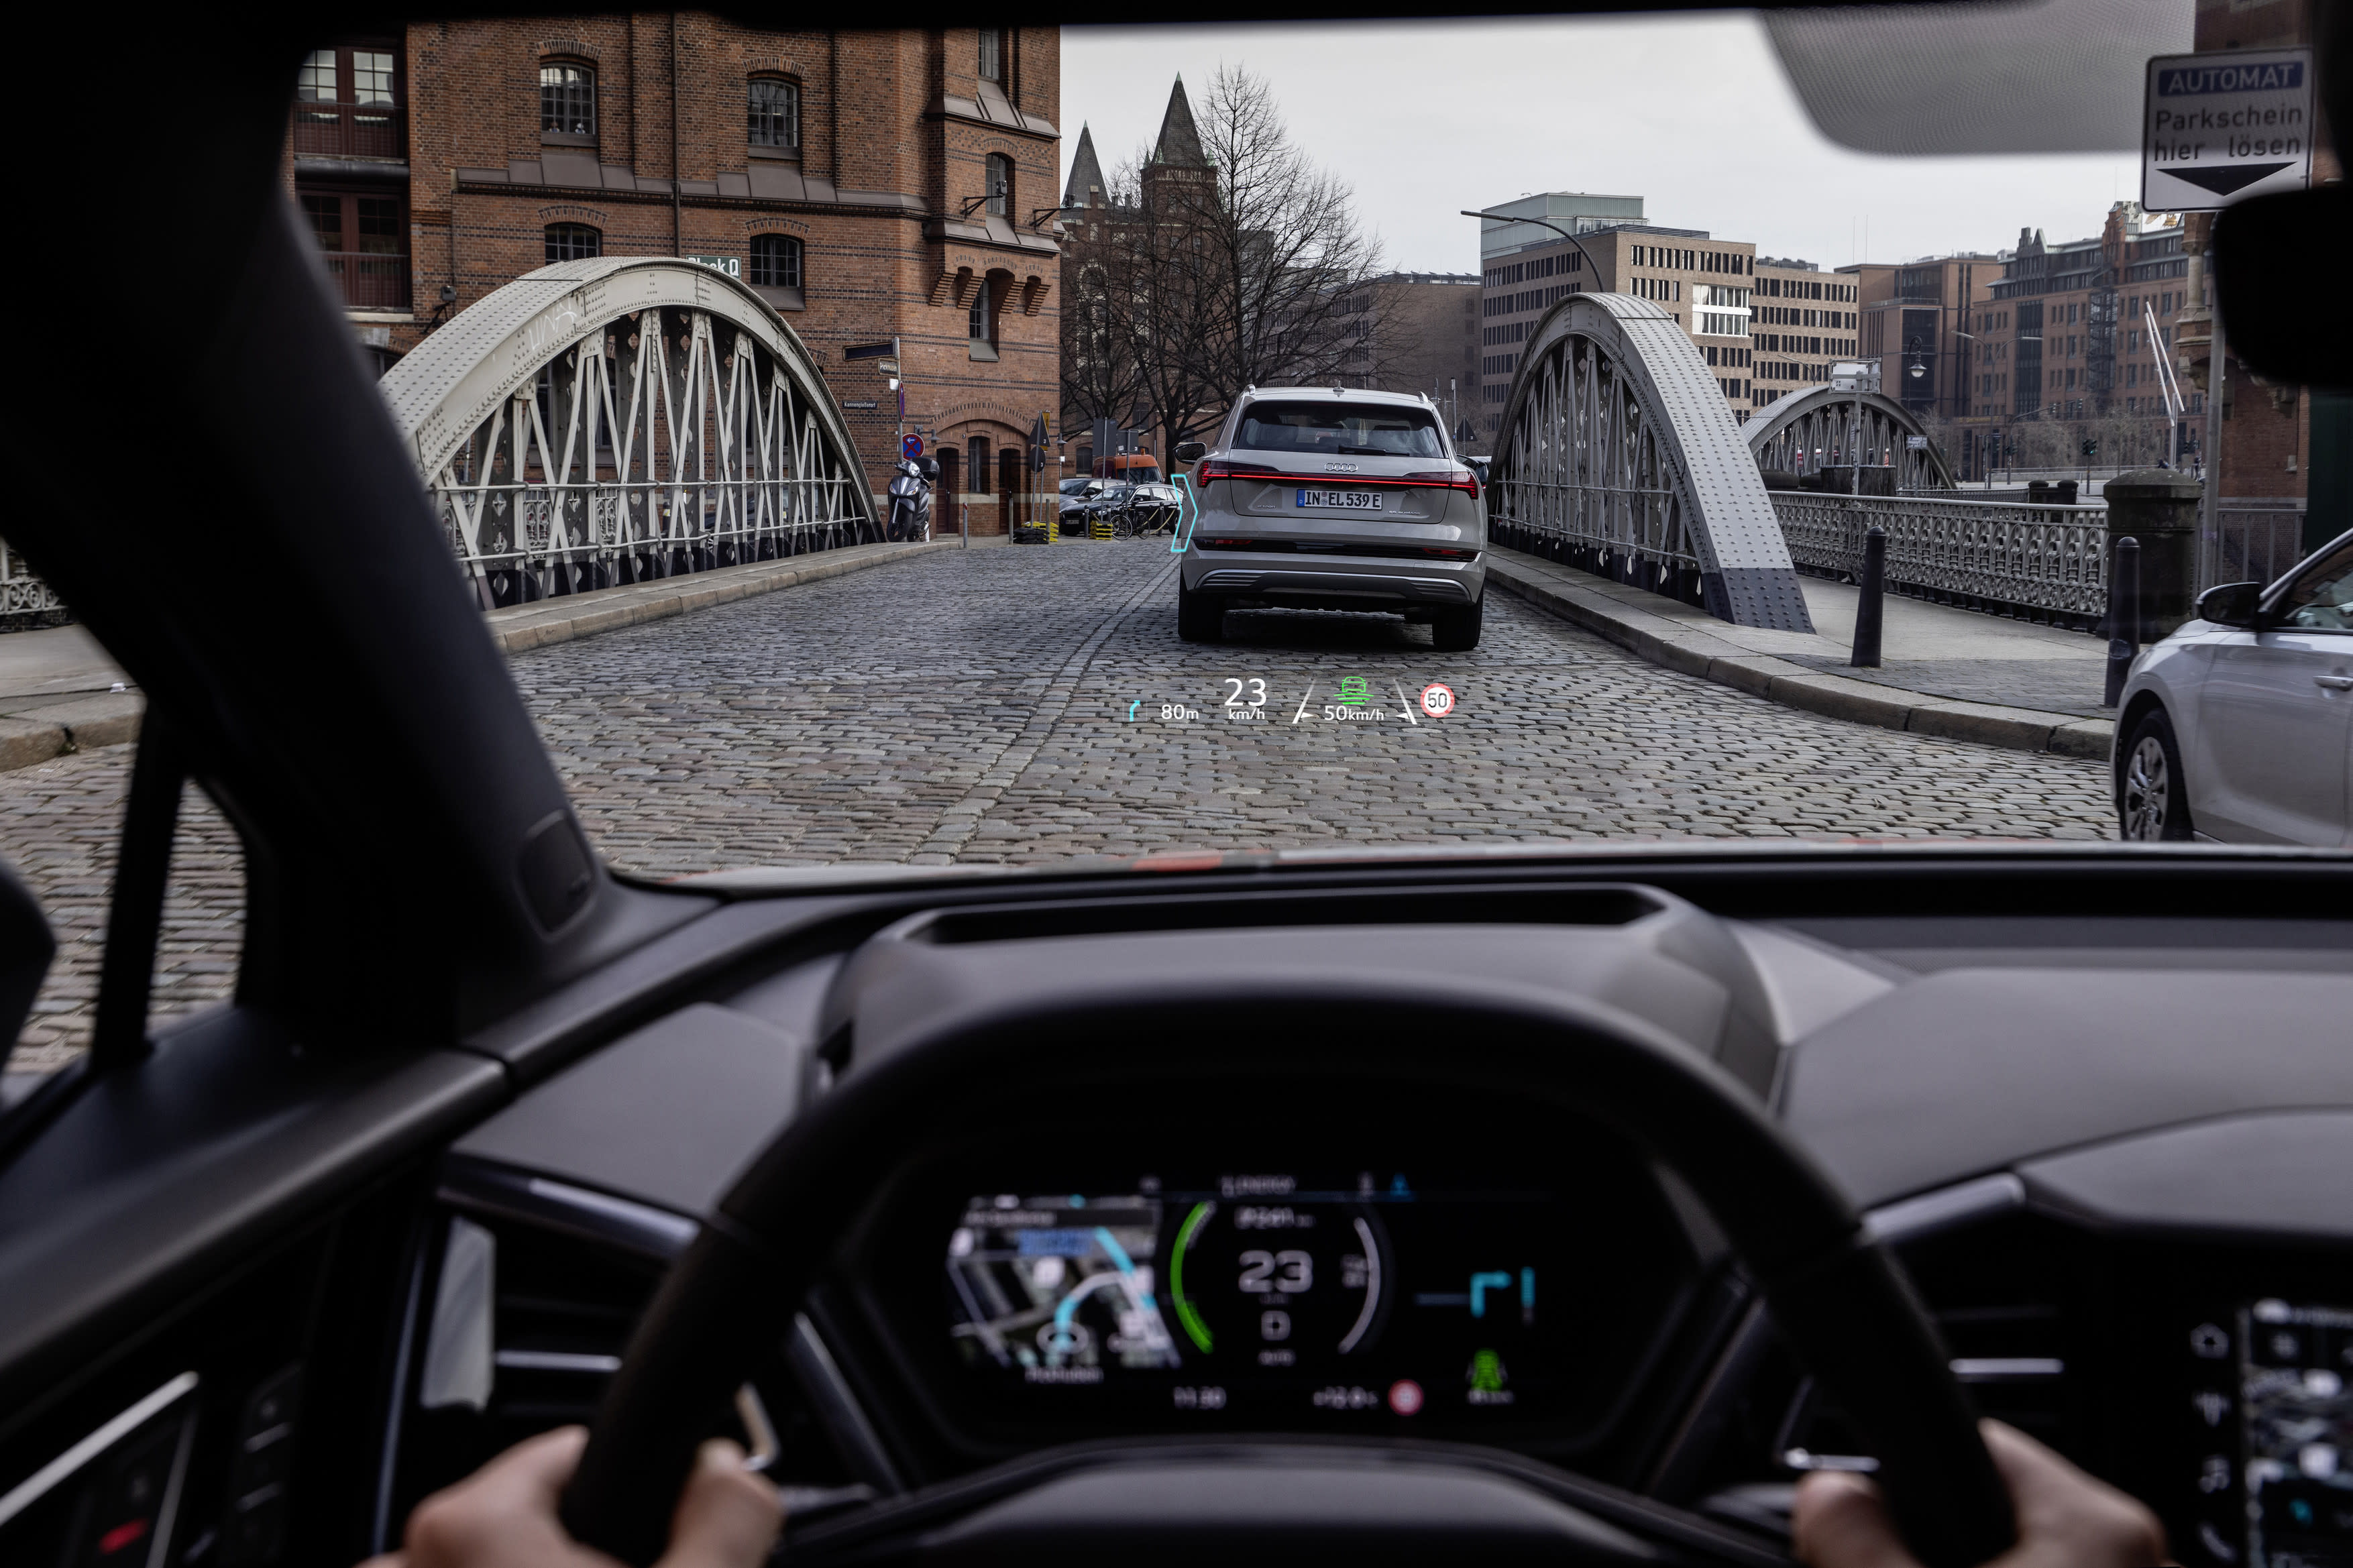 The Audi Q4 e-tron’s reinforced HUD radiates information on the windscreen